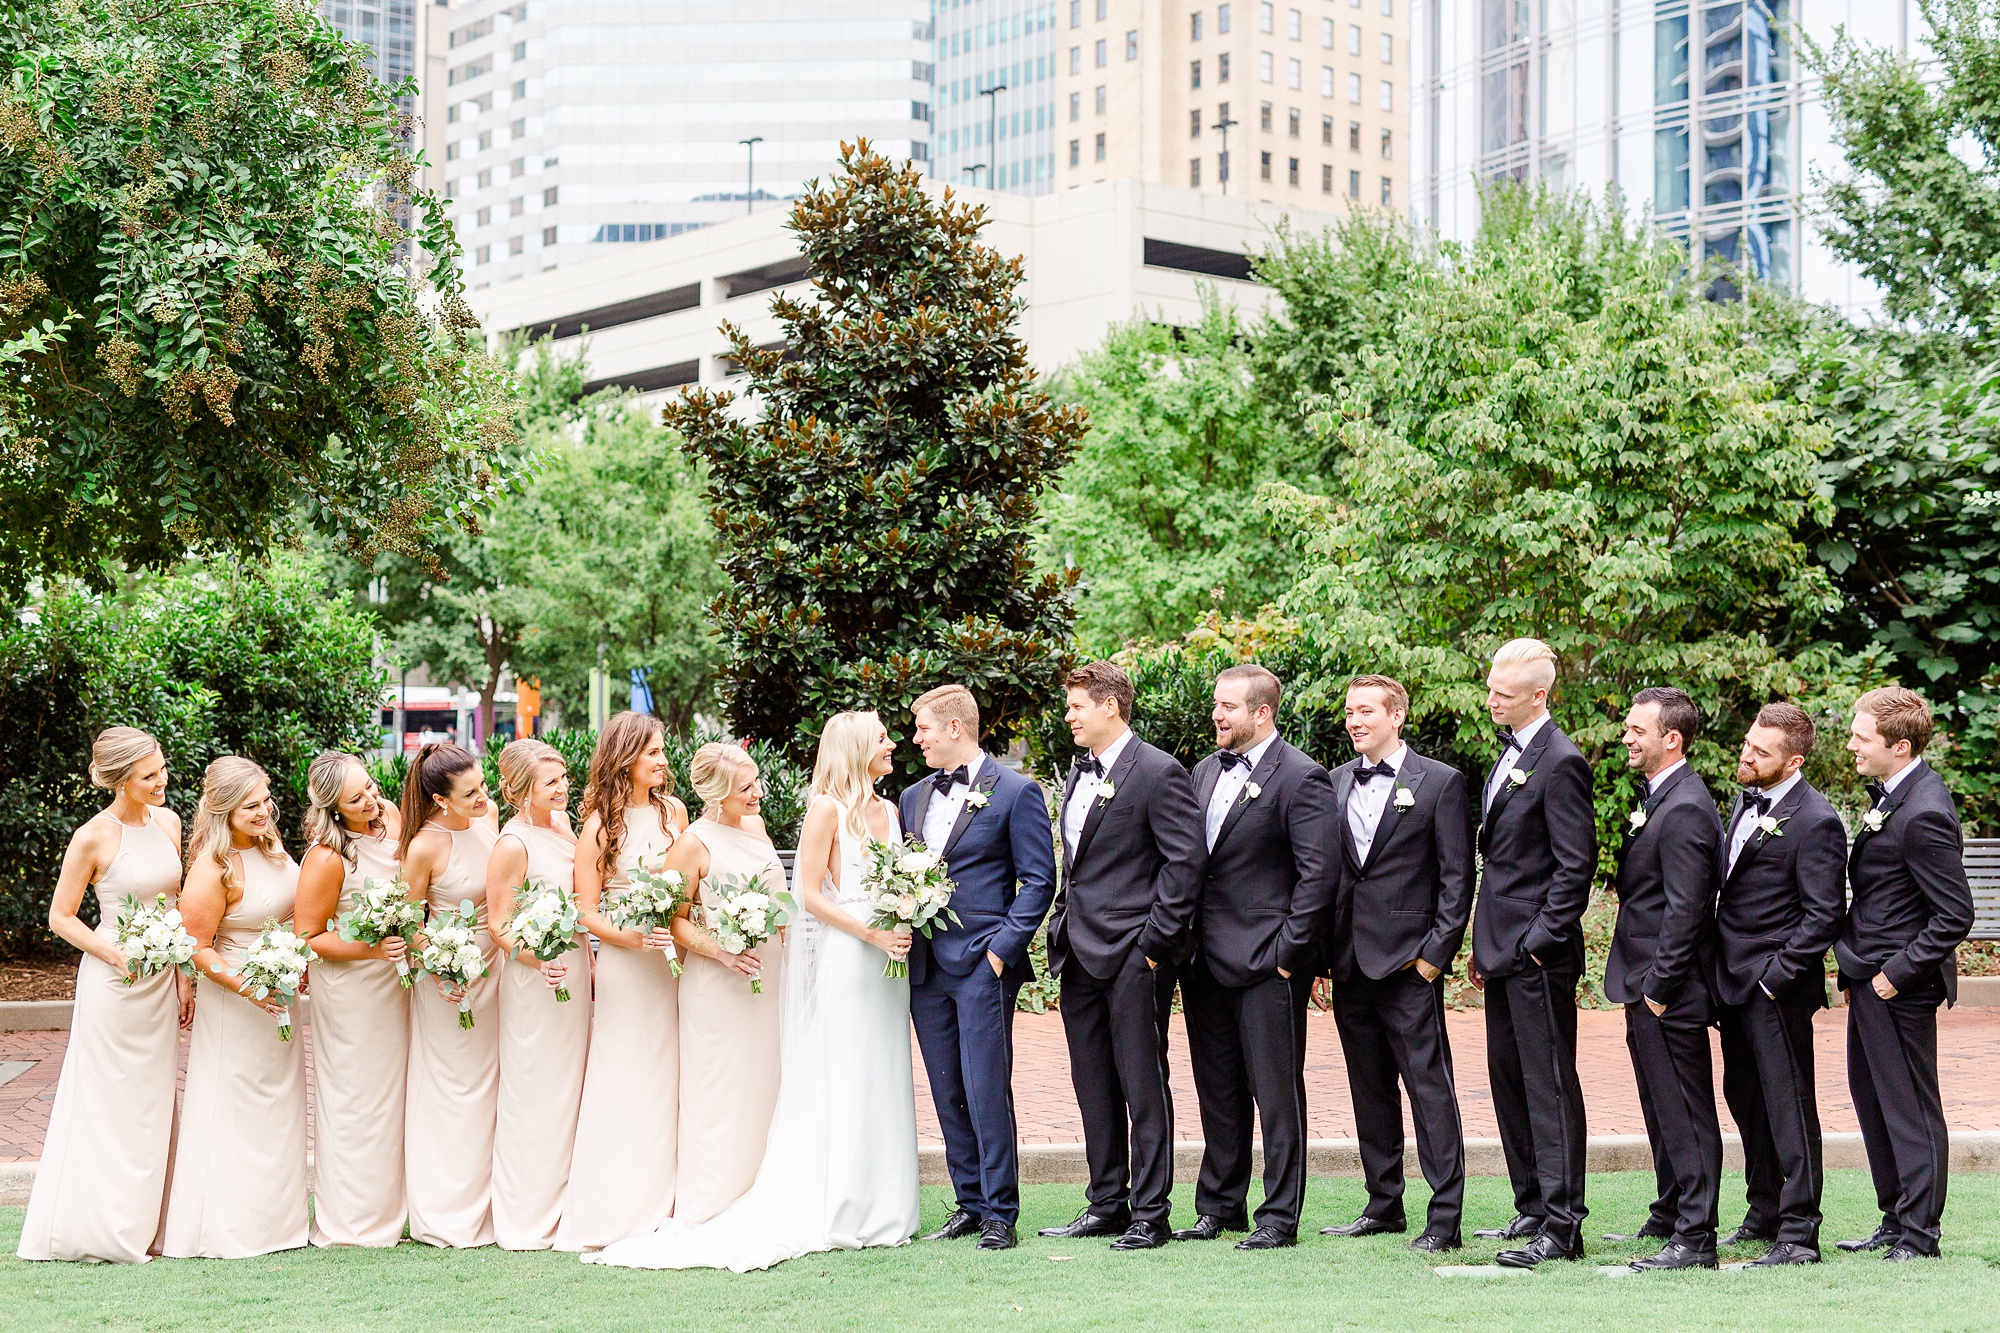 wedding party in tuxes and champagne gowns pose in Romare Bearden Park